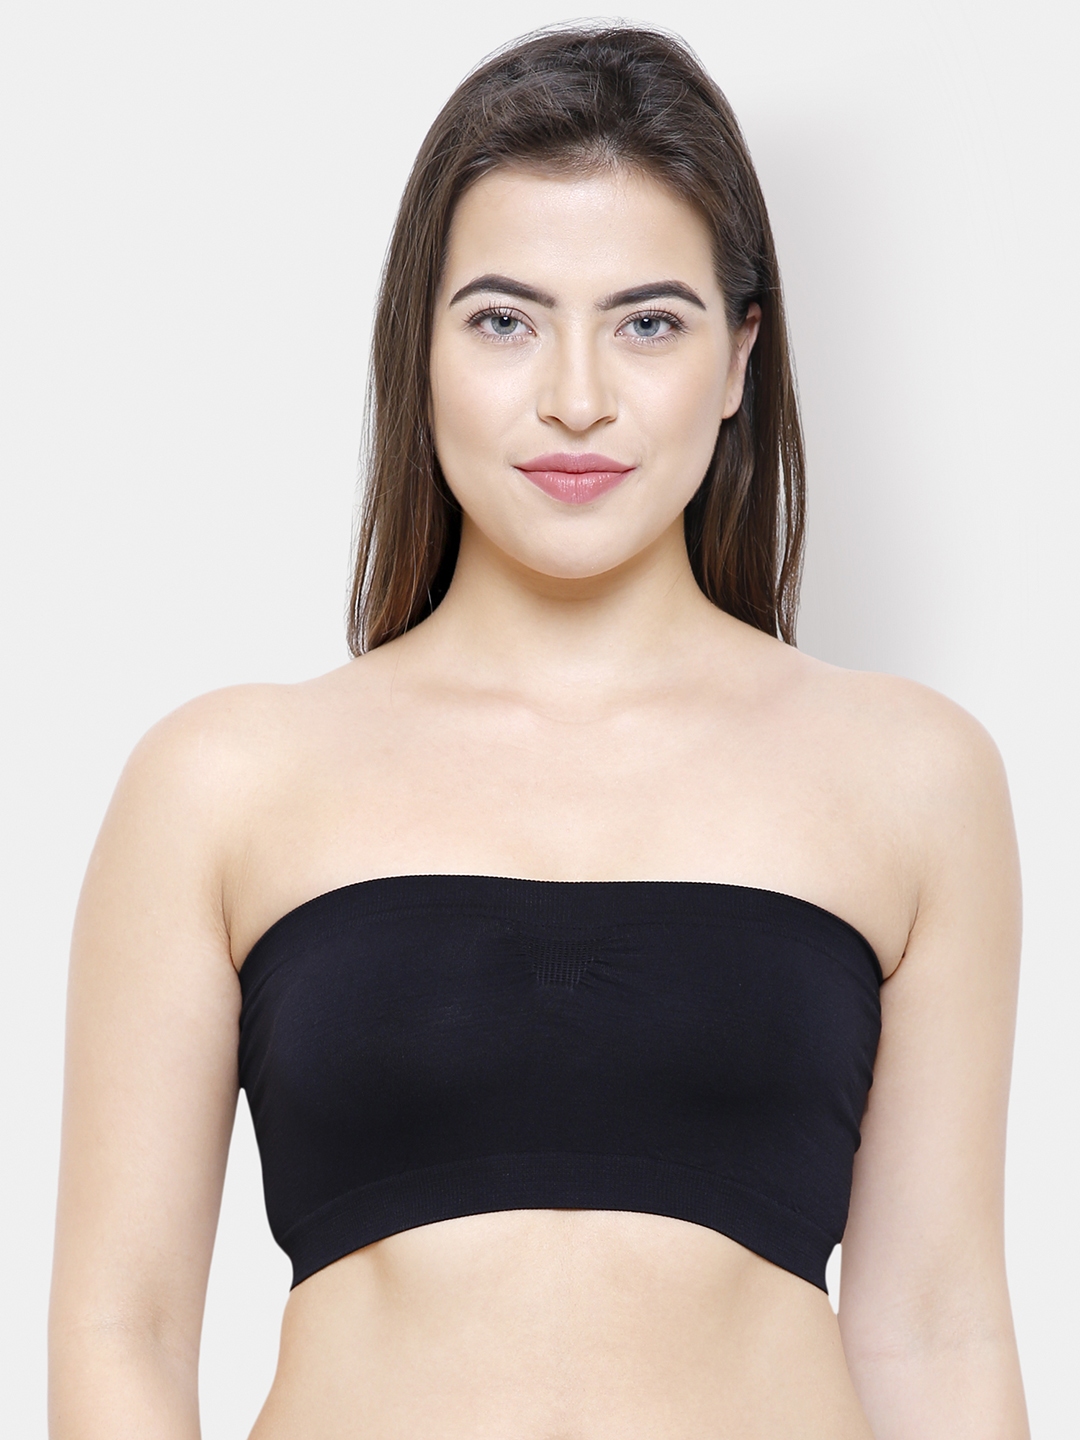  Popular Girl's Seamless Bandeau Bra - 2 pack - Black and Nude -  M: Clothing, Shoes & Jewelry